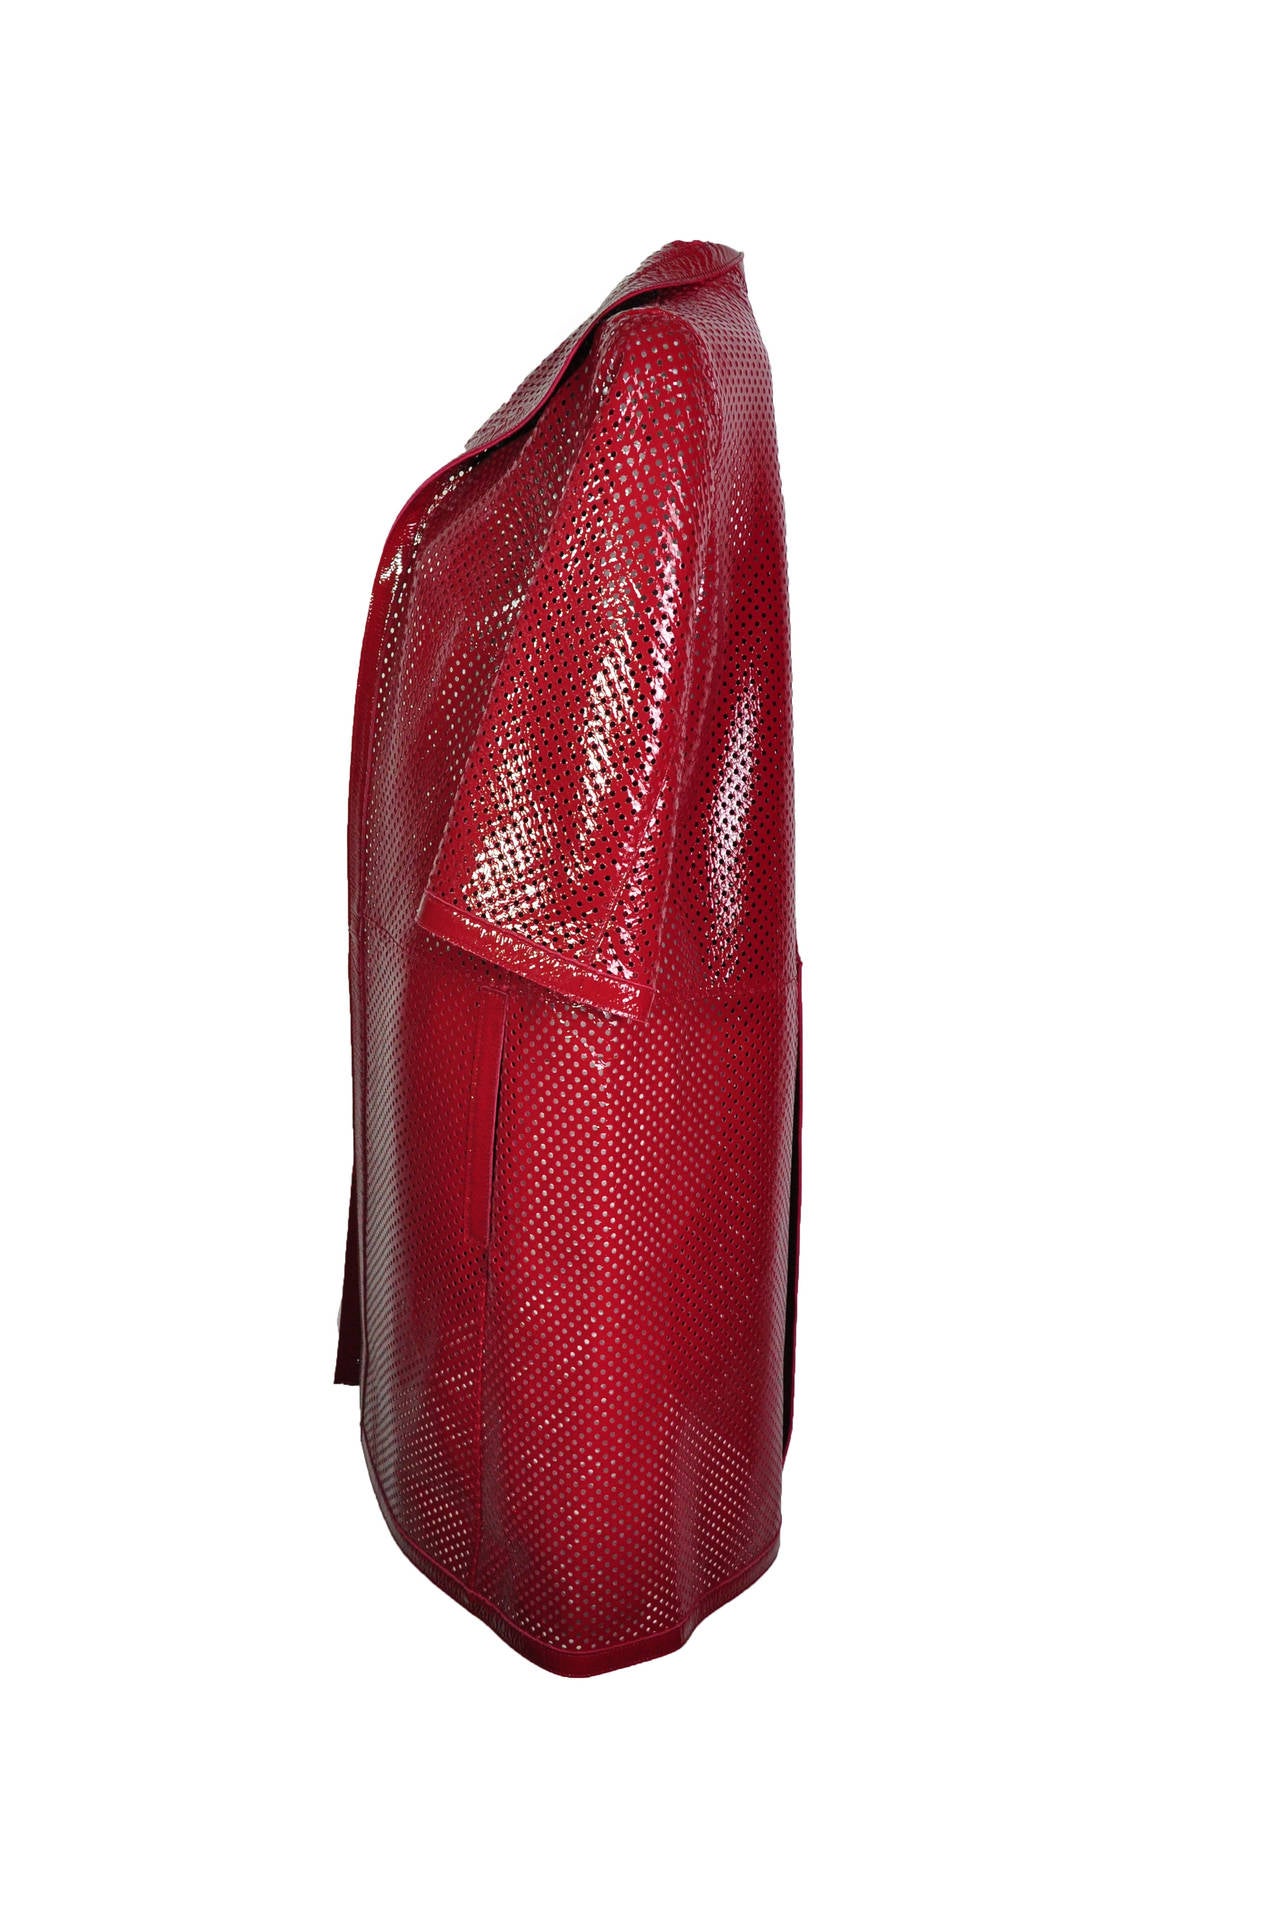 Marni Chili Red Perforated Patent Leather Dust Coat In New Condition For Sale In Hong Kong, Hong Kong